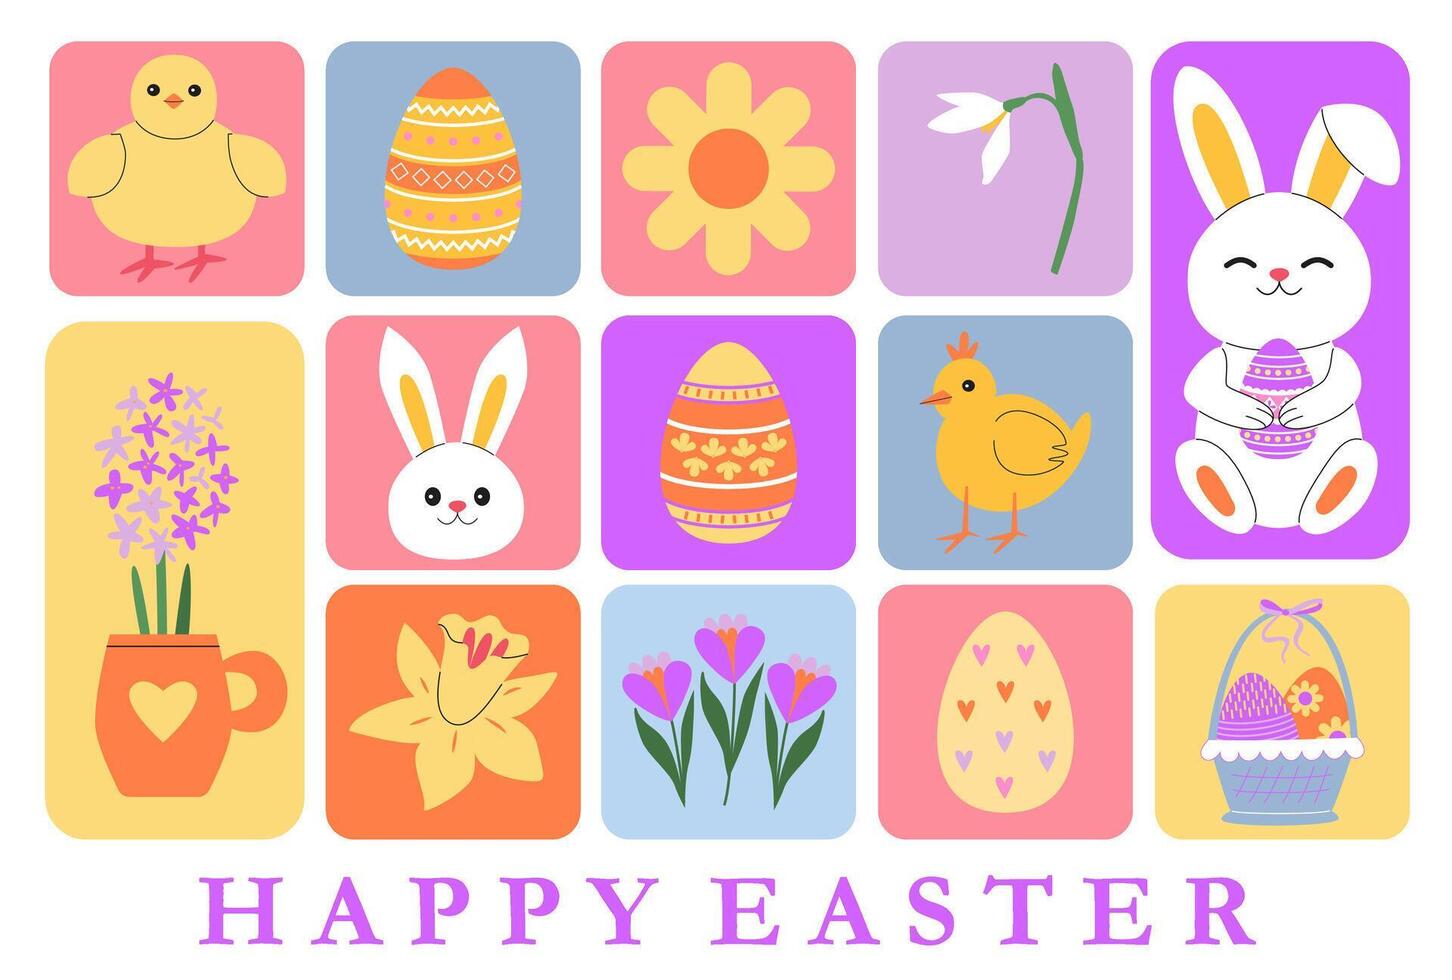 Modern geometric Easter greeting card. Easter bunny, chicks, eggs and flowers. Spring holidays. Happy Easter congratulation. Festive invitation, flyer, banner, background. vector